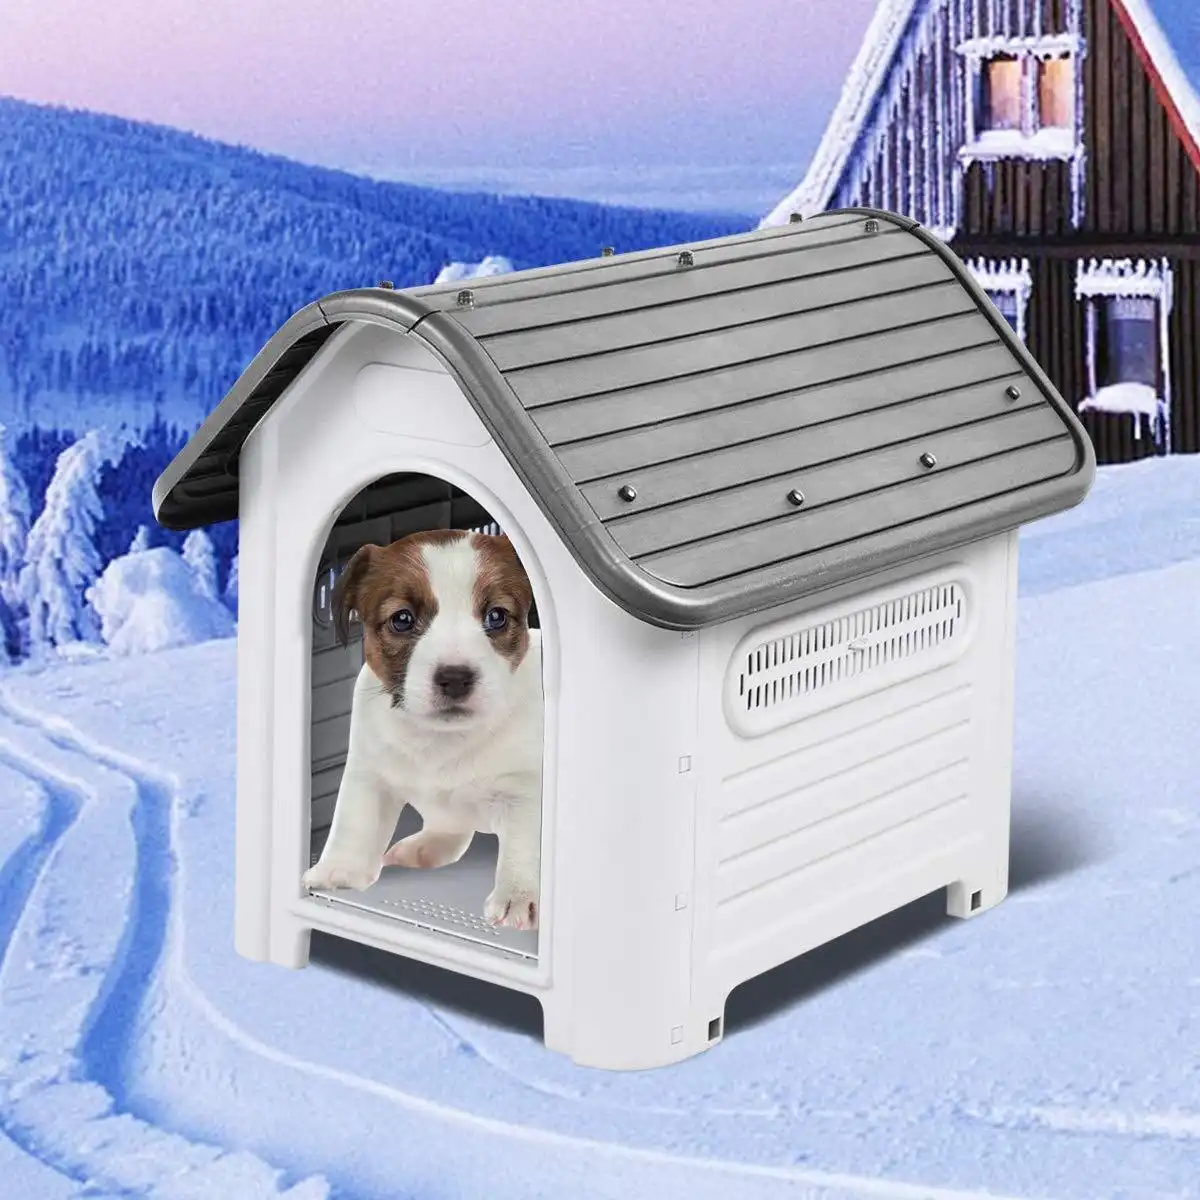 30" High Waterproof Plastic Dog House Pet Kennel Up to 30LB